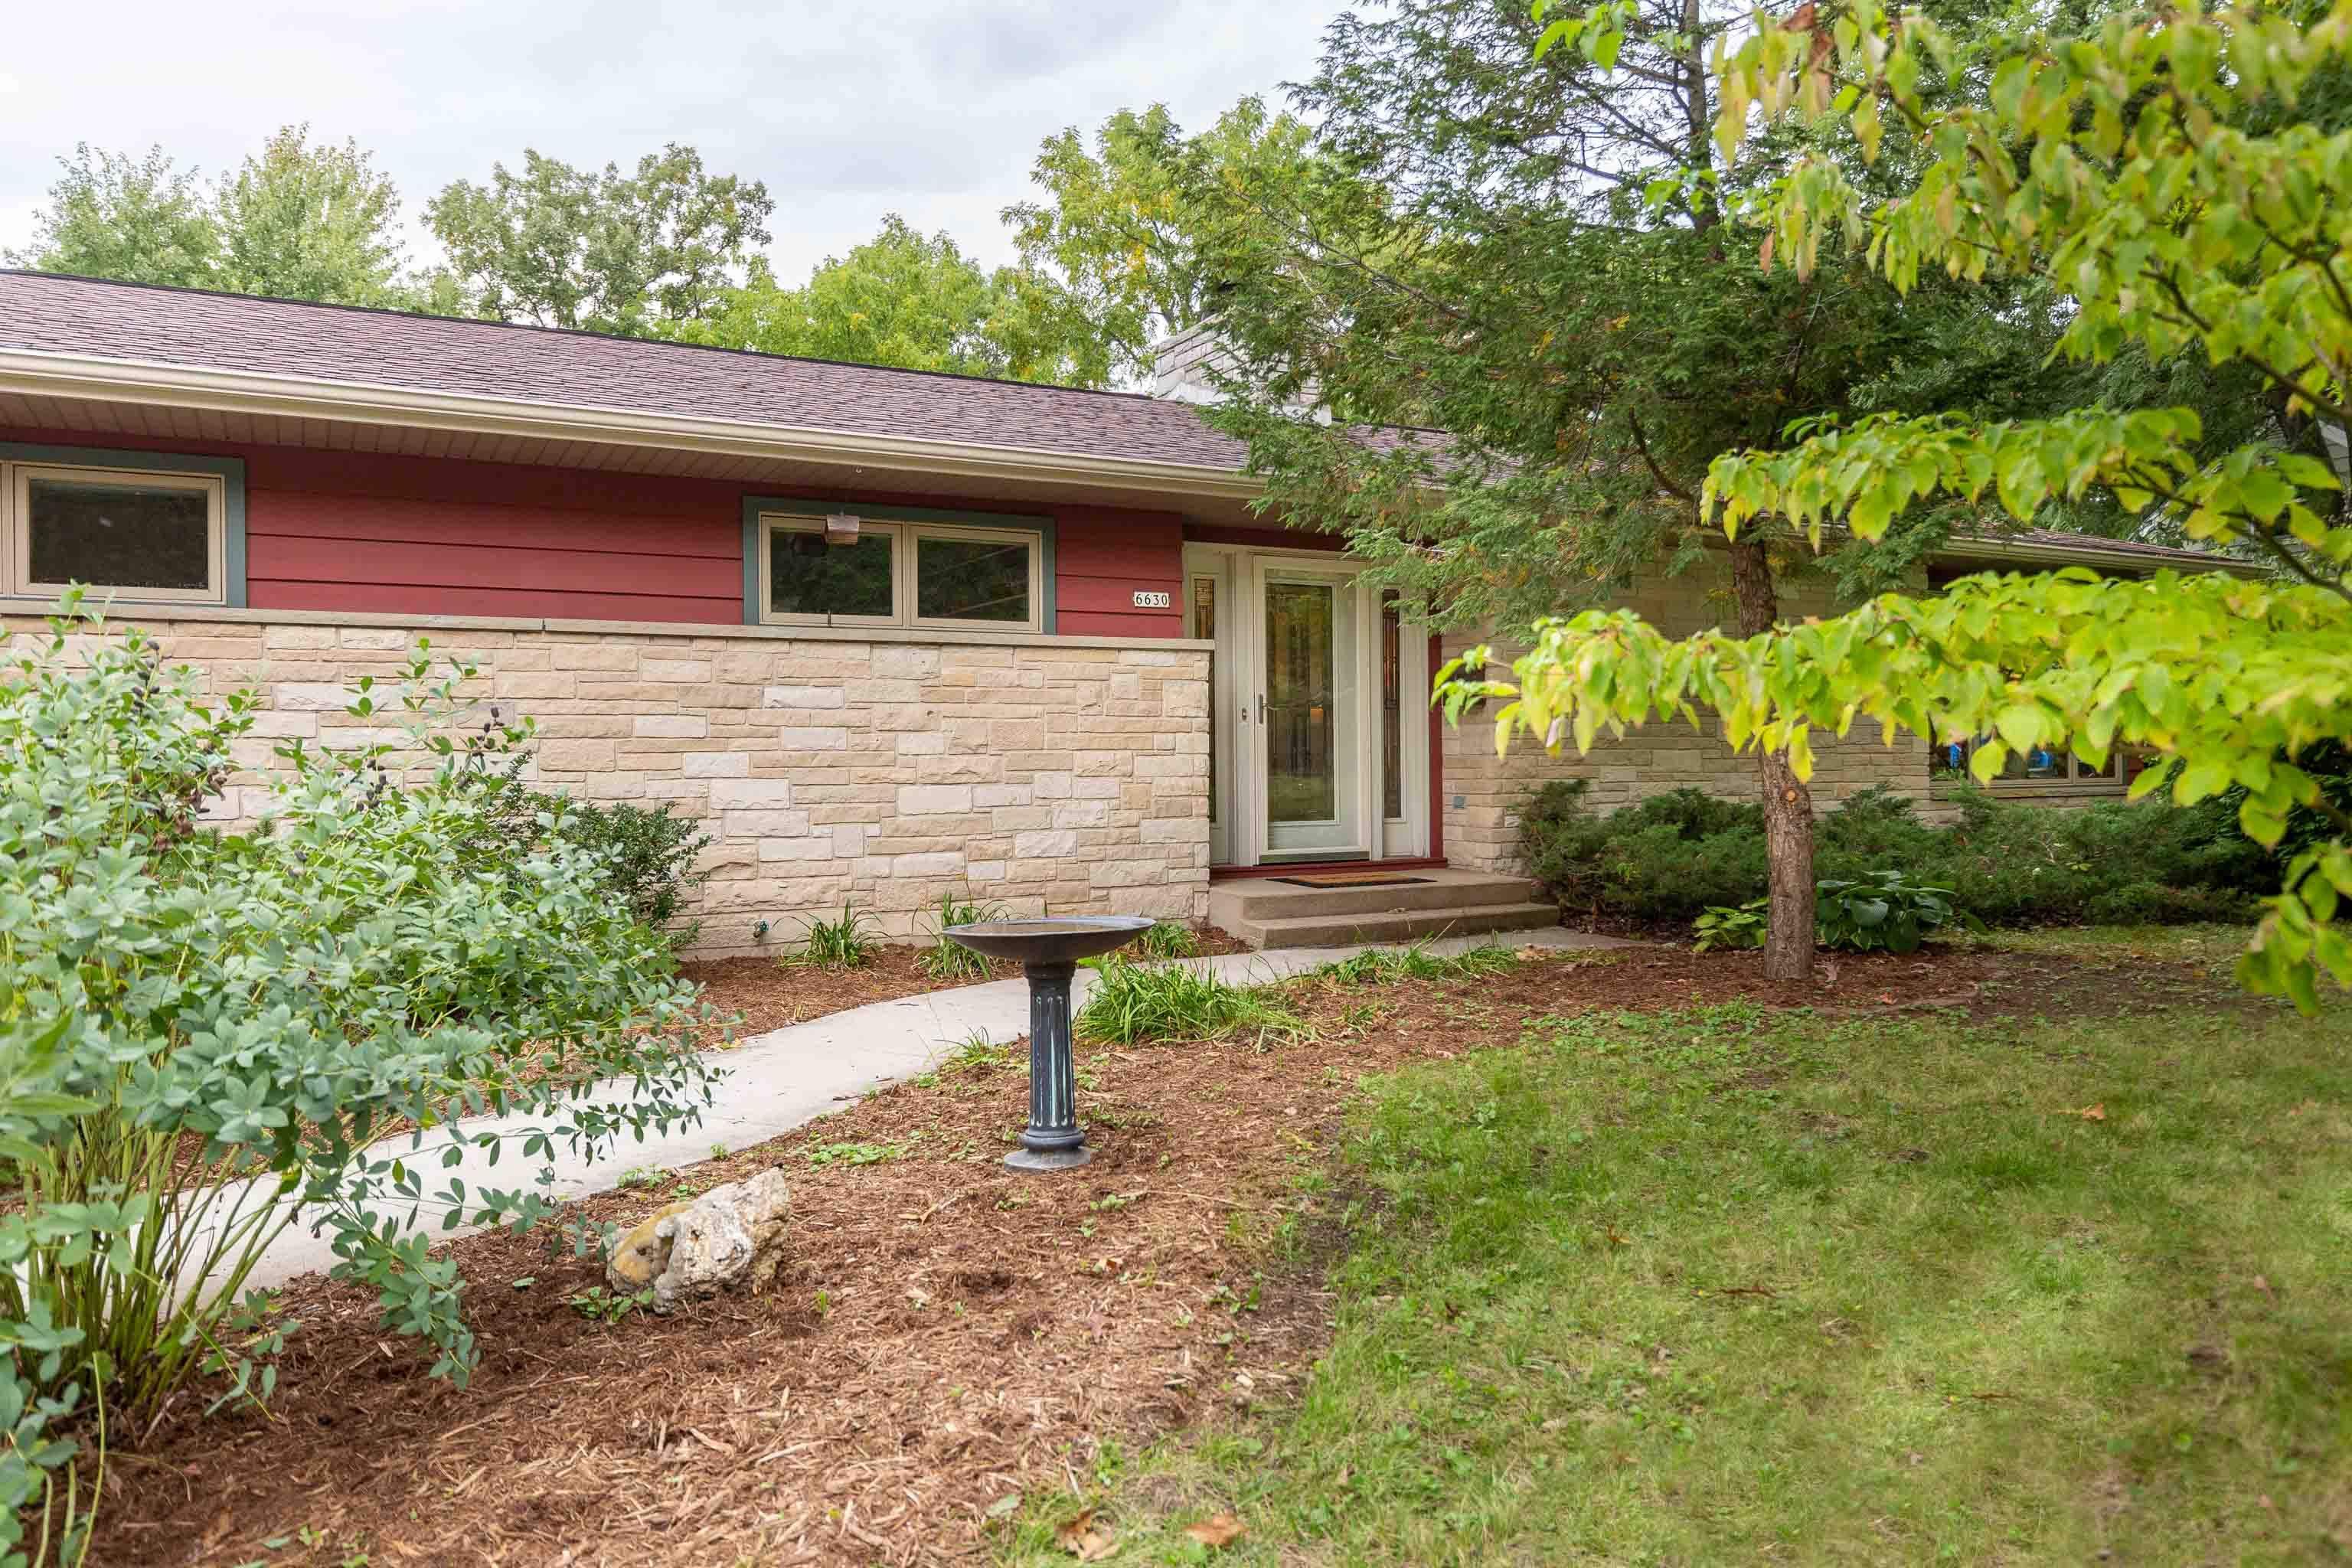 This sprawling, midcentury modern ranch sits on a lush, private, wooded lot in Middleton, walking distance to downtown shops + dining, schools, Lake Mendota & parks. As if that's not enough, the eco-friendly home has been lovingly maintained & thoughtfully updated to suit the architecture. A stunning kitchen takes center stage w/beautiful, custom maple cabinetry + lots of counter space. Just off the kitchen are a serene sunroom that opens to the deck, a big laundry room + a dining room. Enjoy a cozy fire in the spacious living room that wows with an offset lannon stone surround fireplace & big windows. The 3 bedrooms feature the original wood flooring that's throughout the main level. A big LL includes a rec room with bar, a fireplace, an office, a bonus room + full bath.